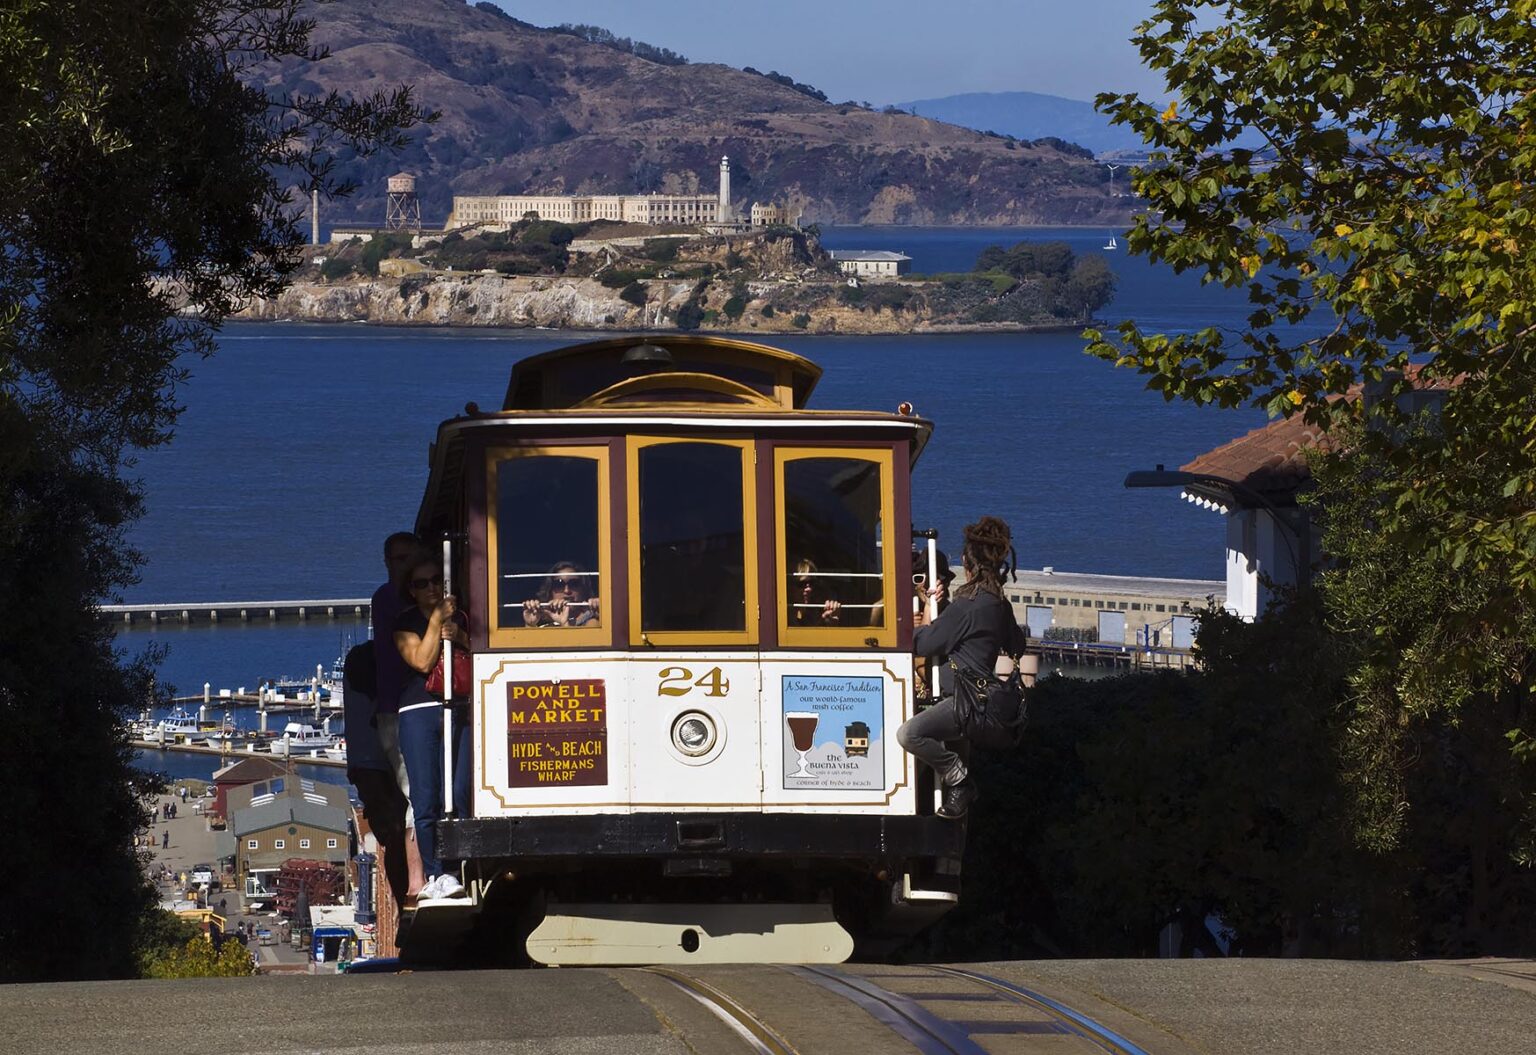 A POWELL and MARKET CABLE CAR with a view of ALCATRAZ ISLAND - SAN FRANCISCO, CALIFORNIA